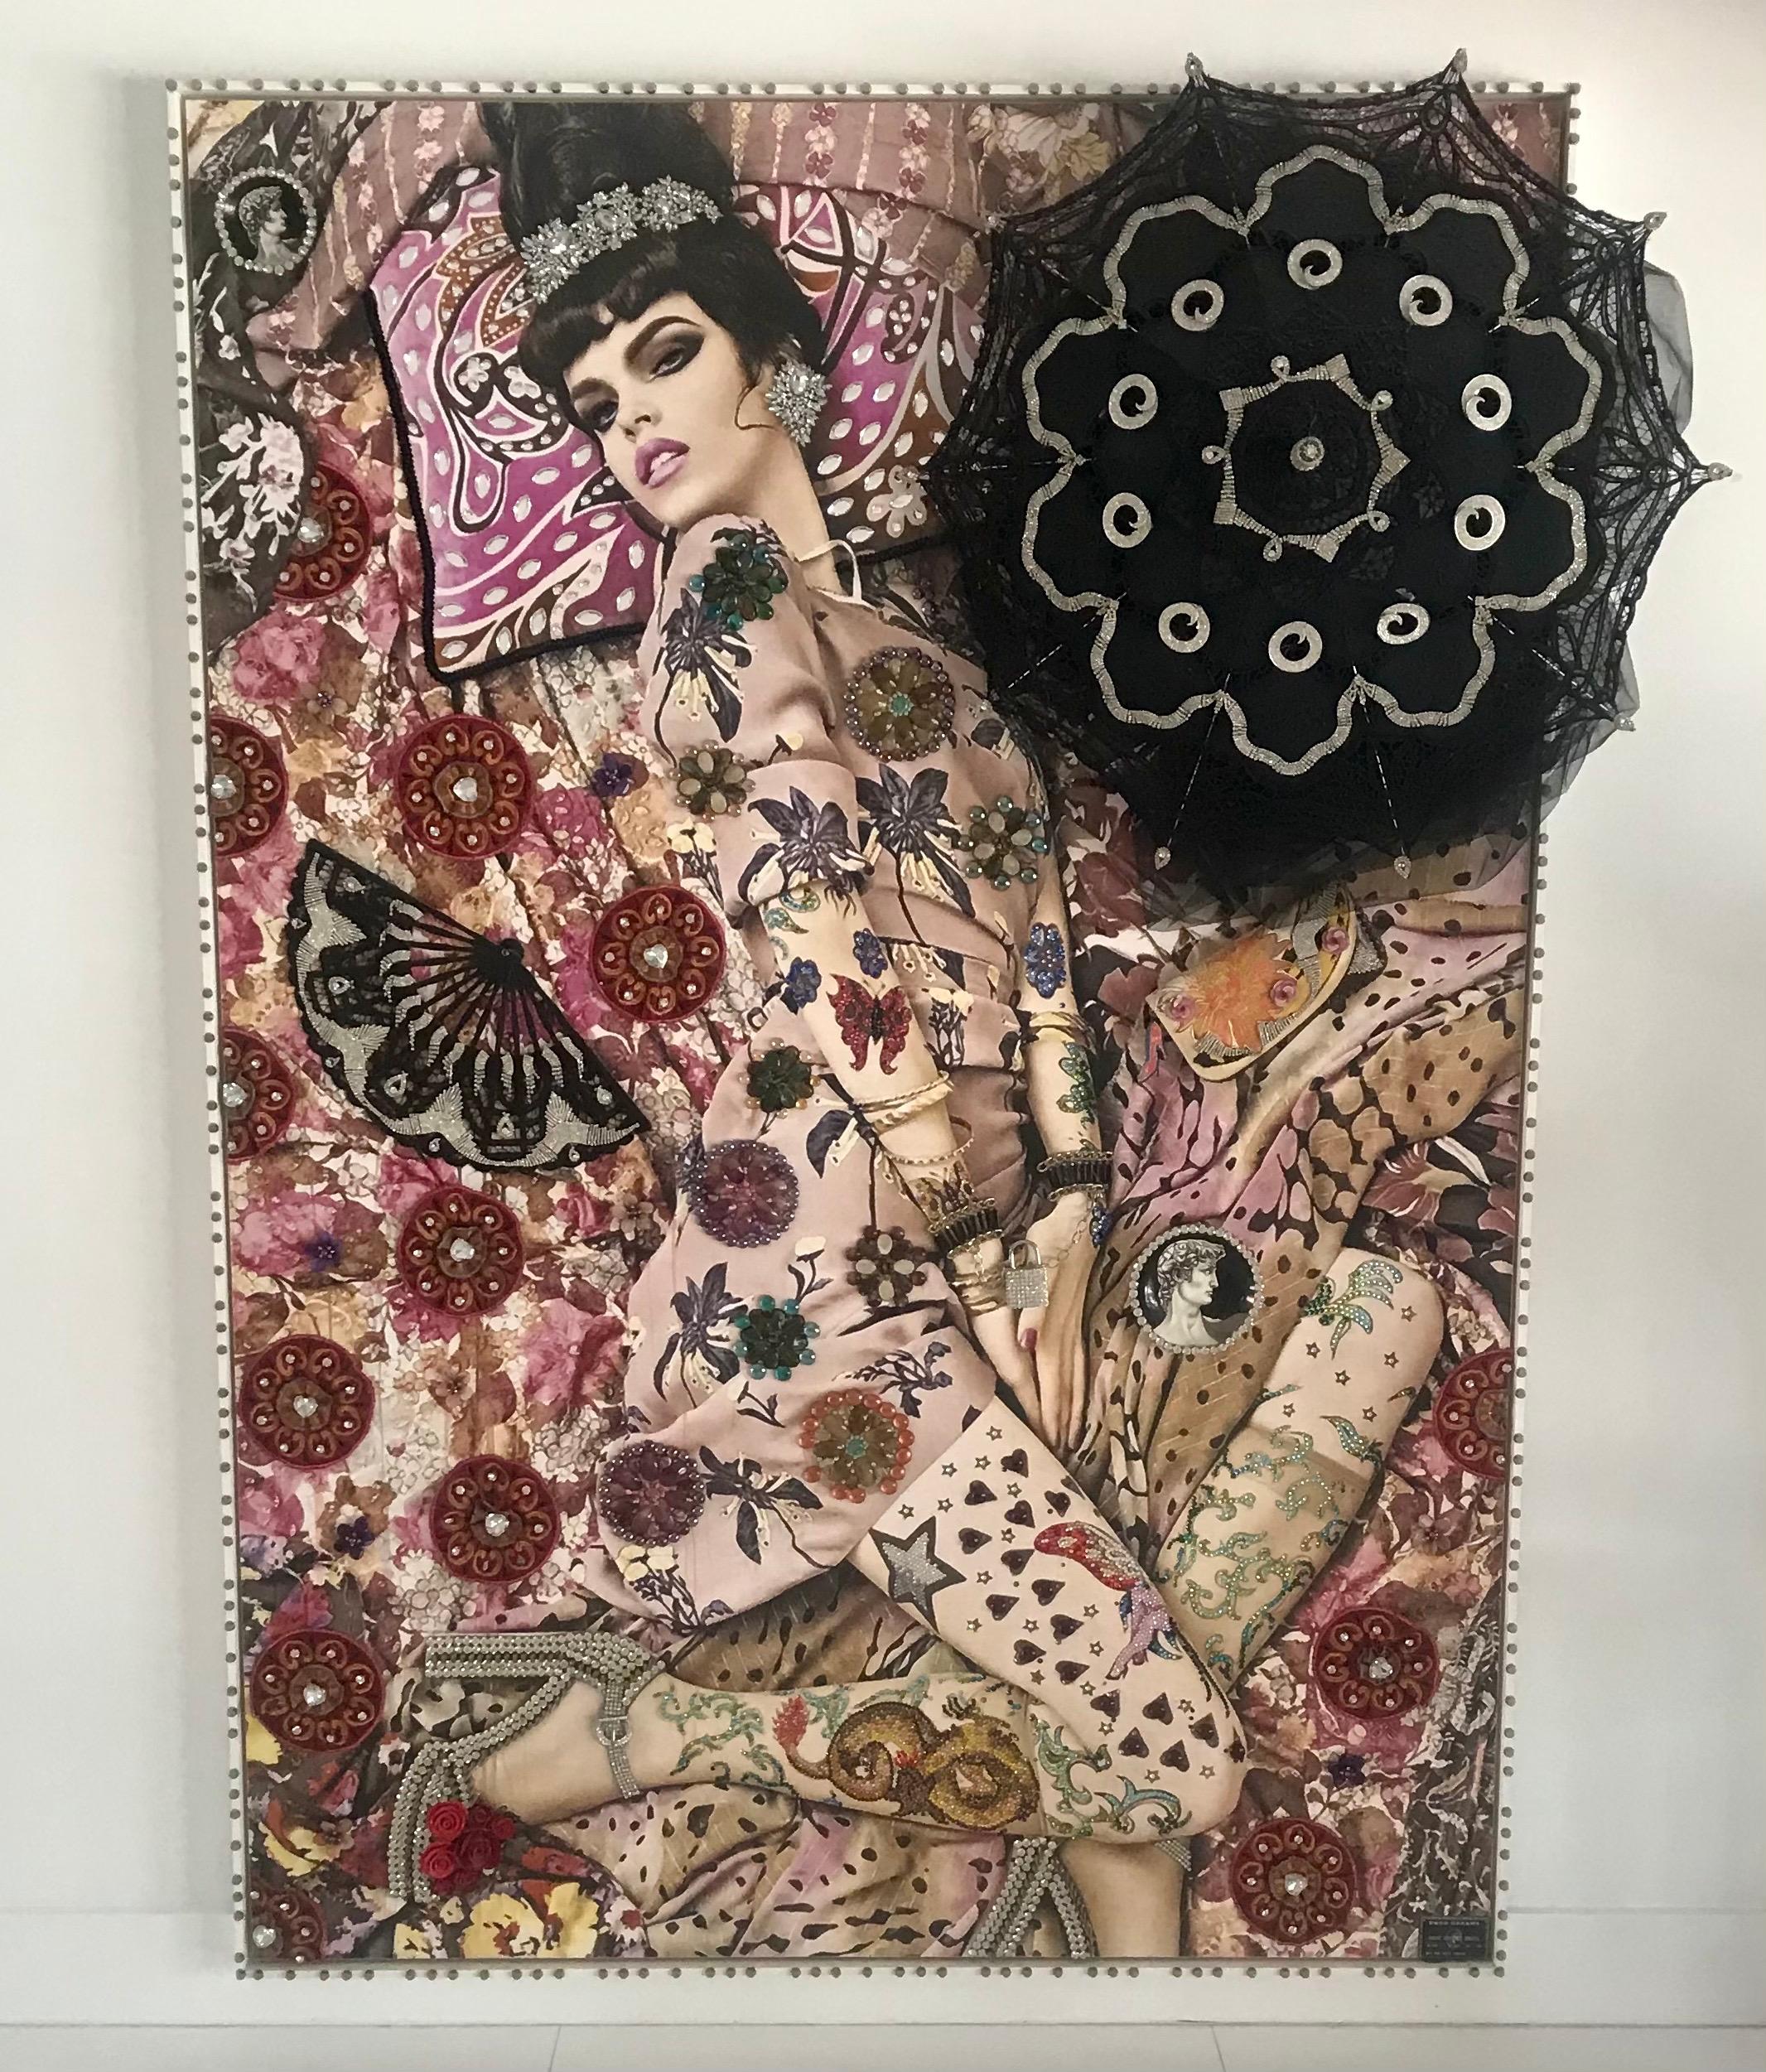 Large and unique silkscreen print depicting a three dimensional swirl of fabrics, crystals, studs, spikes and other treasures. This piece was created and shown at art Basel, Miami 2016 to convey 